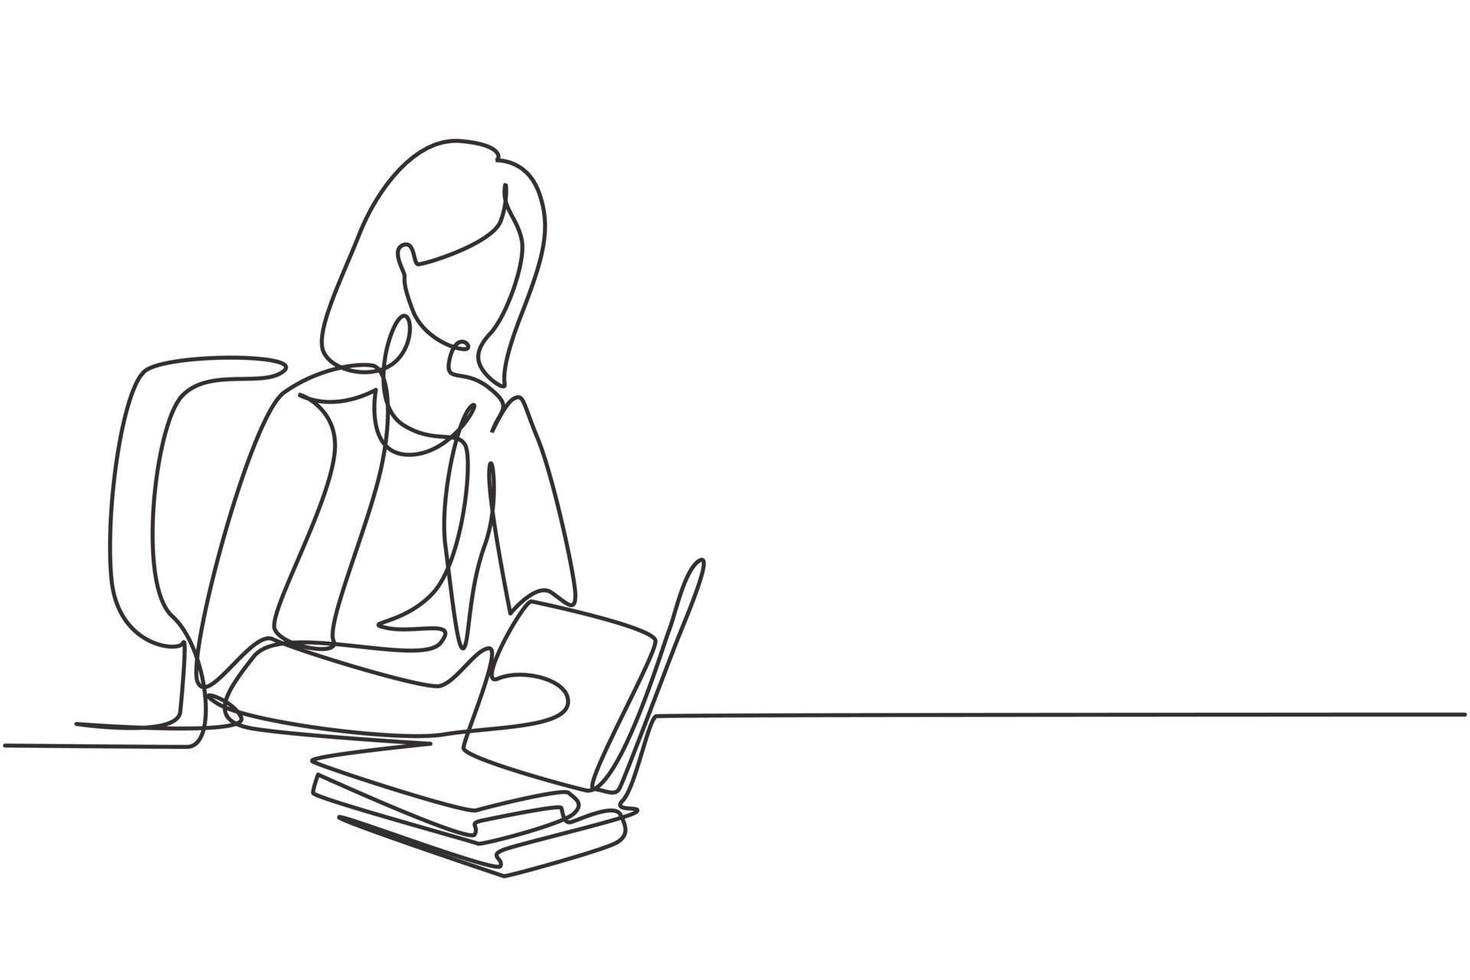 Single continuous line drawing young woman reading, learning and sitting on chair around table. Study in library. Smart student, education concept. One line draw graphic design vector illustration